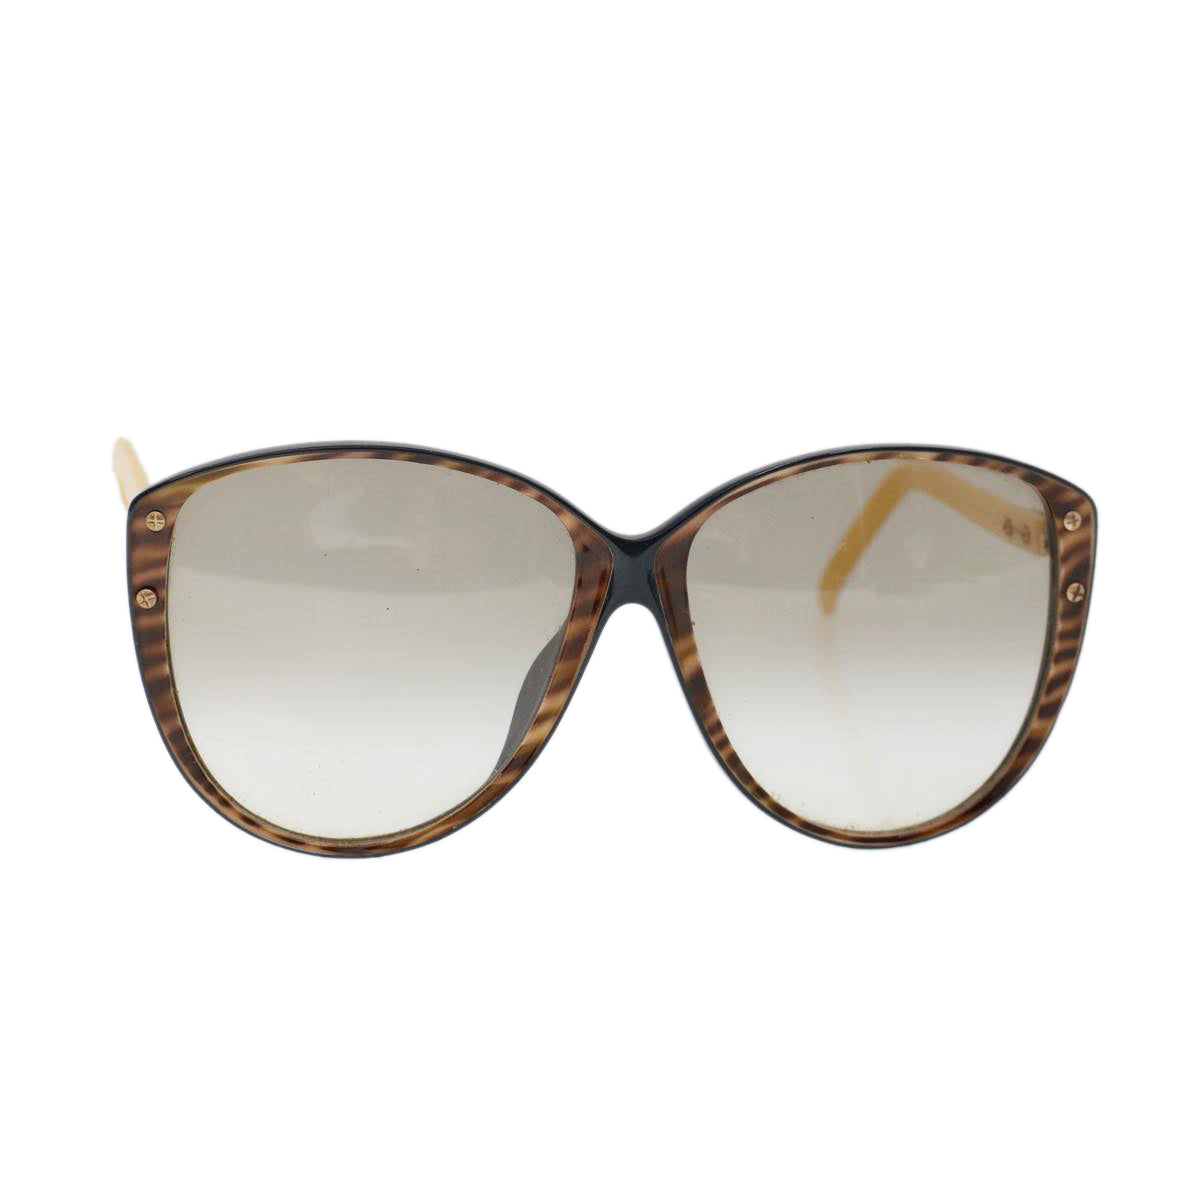 Christian Dior Sunglasses Plastic Brown Auth cl740